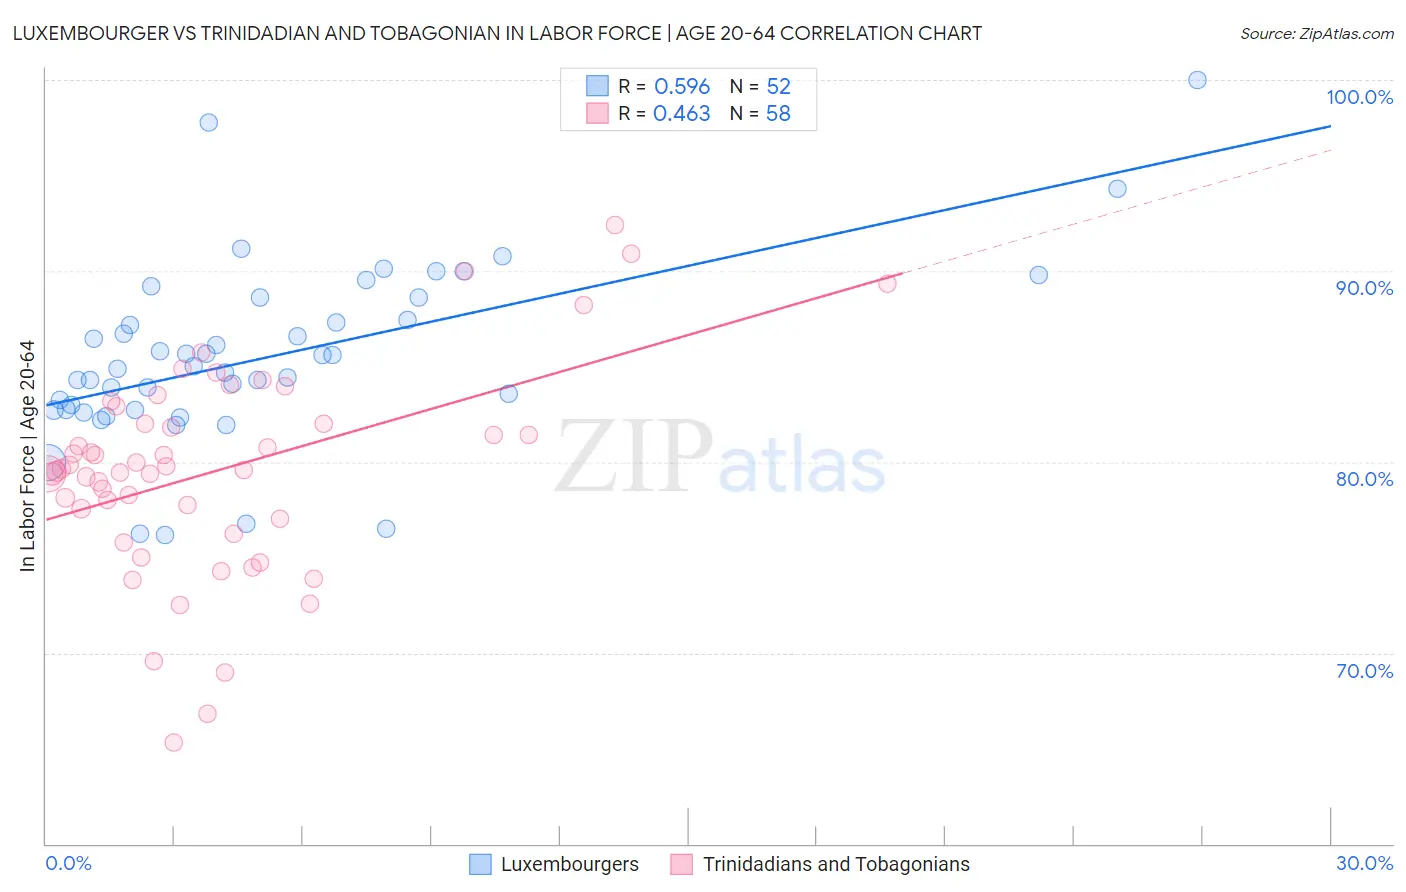 Luxembourger vs Trinidadian and Tobagonian In Labor Force | Age 20-64